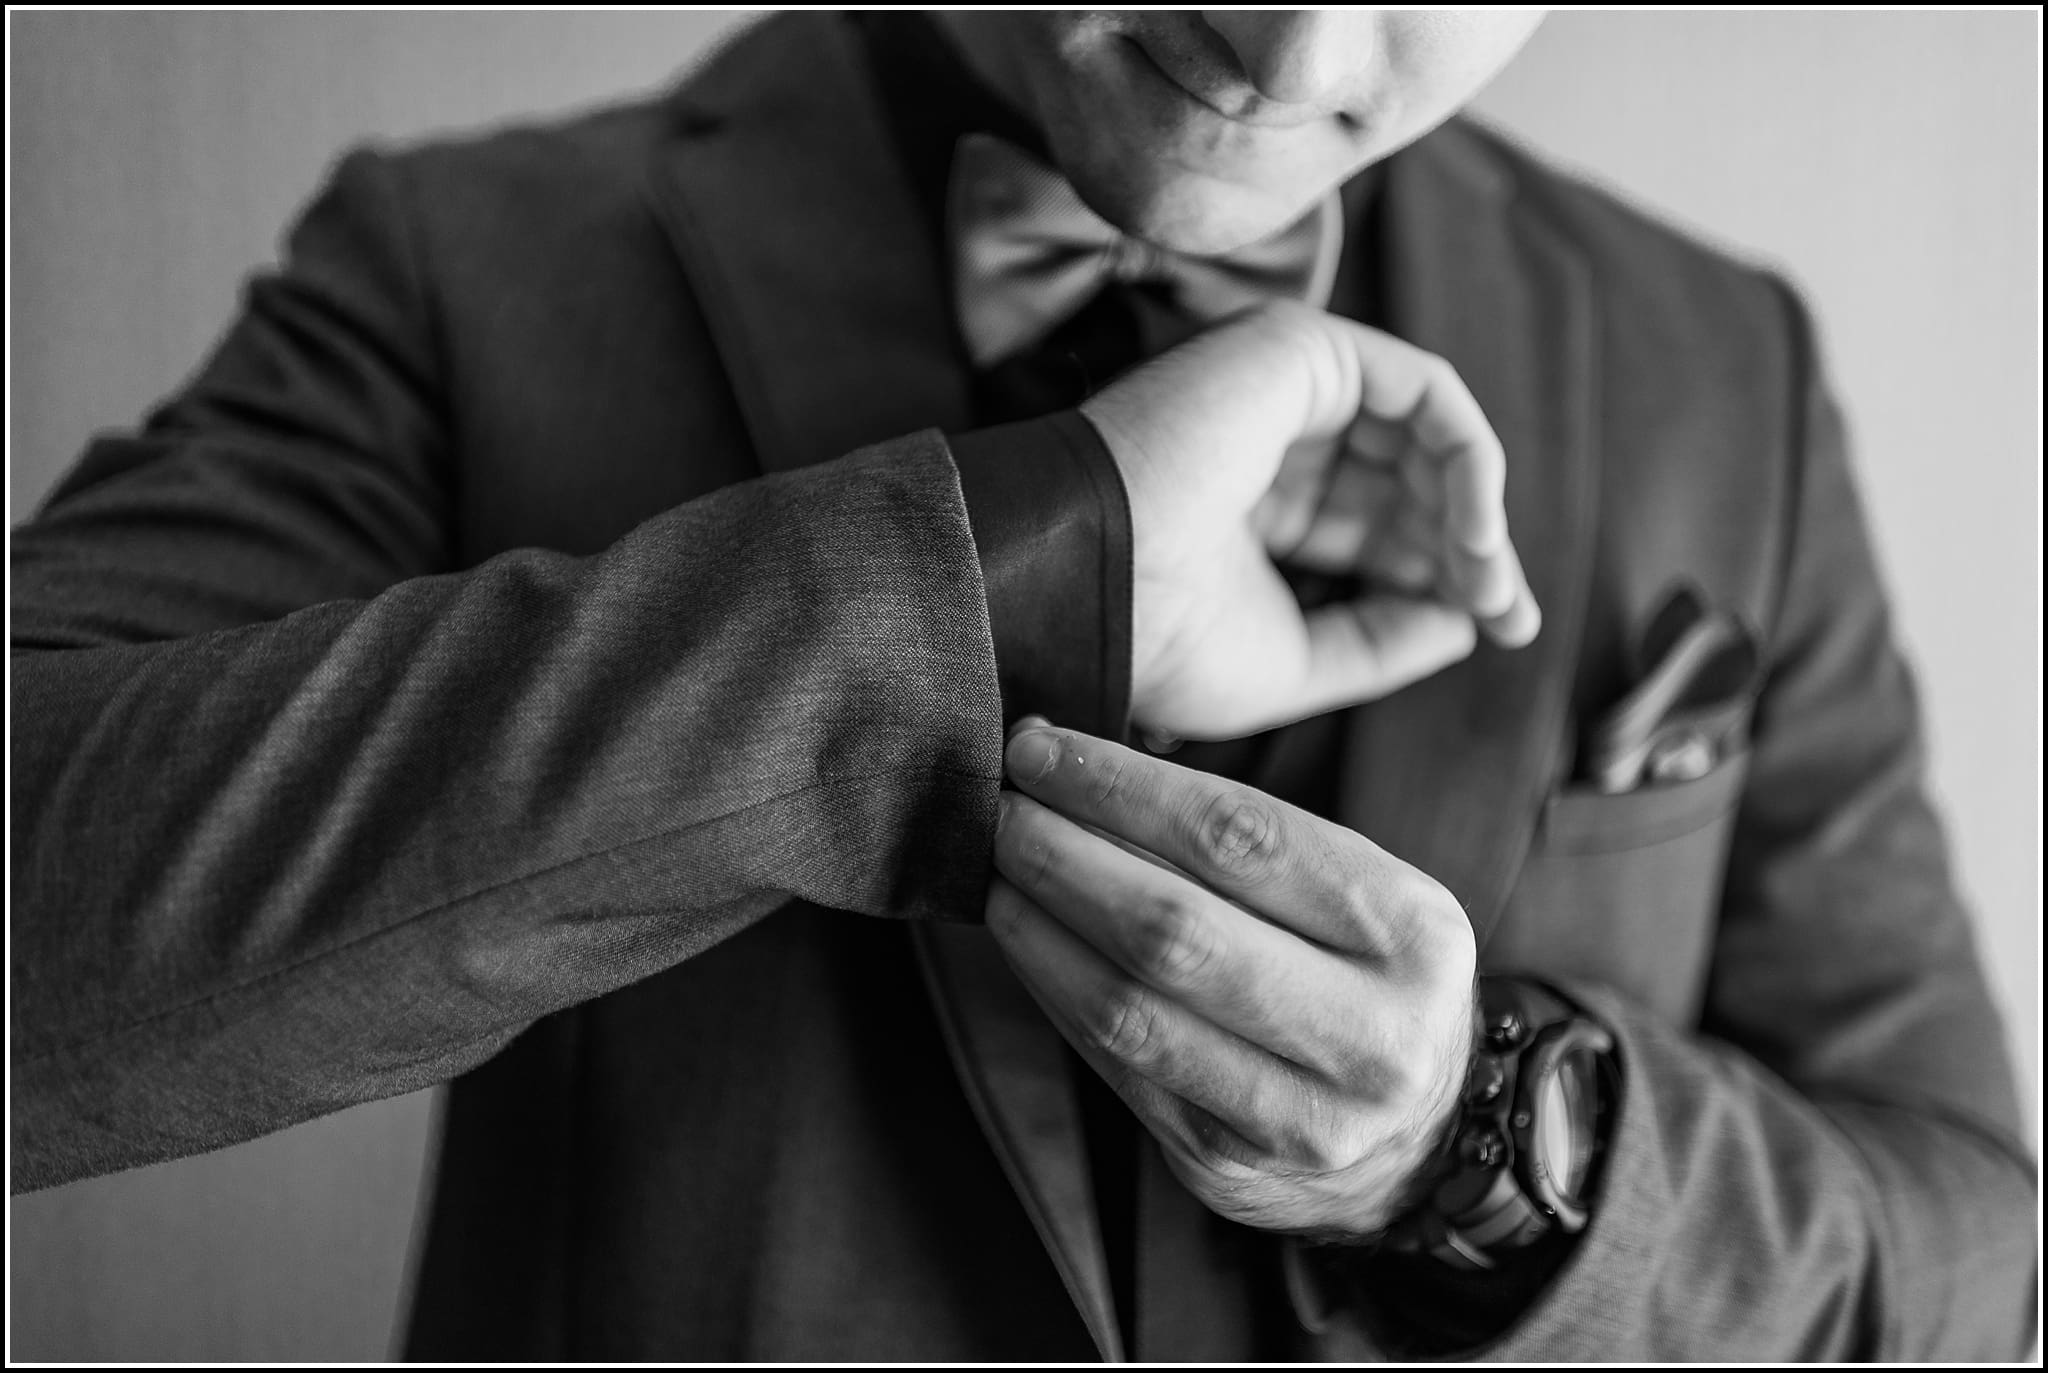  favorite wedding images 2016, wedding photos from 2016, our favorite wedding photos, groom getting ready portrait